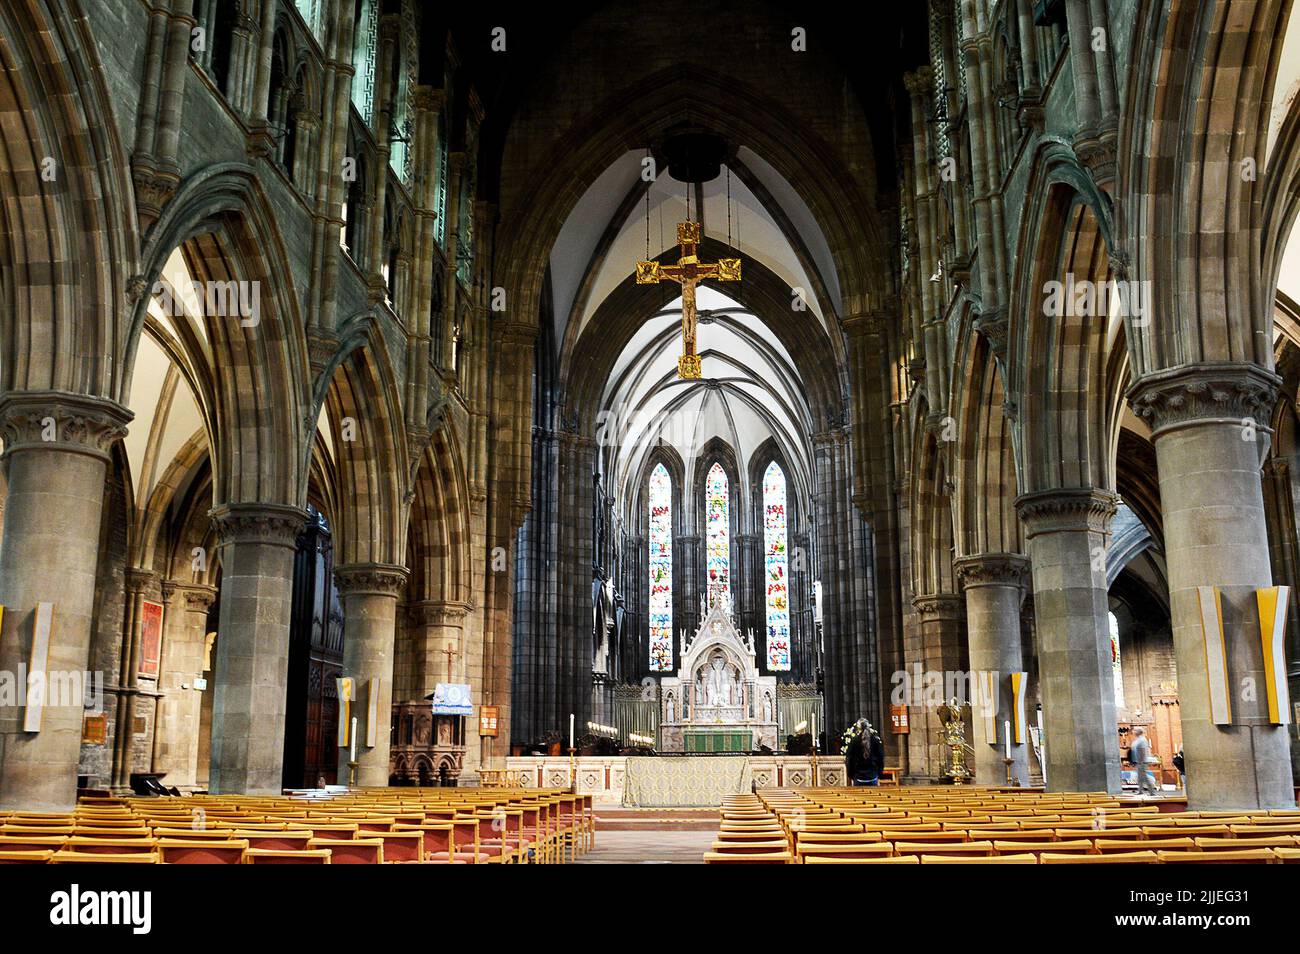 EDINBURGH, SCOTLAND - 12 JULY 2022:Interior of St Mary's Episcopal Cathedral, or the Church of St Mary the Virgin, designed by George Gilbert Scott. Stock Photo